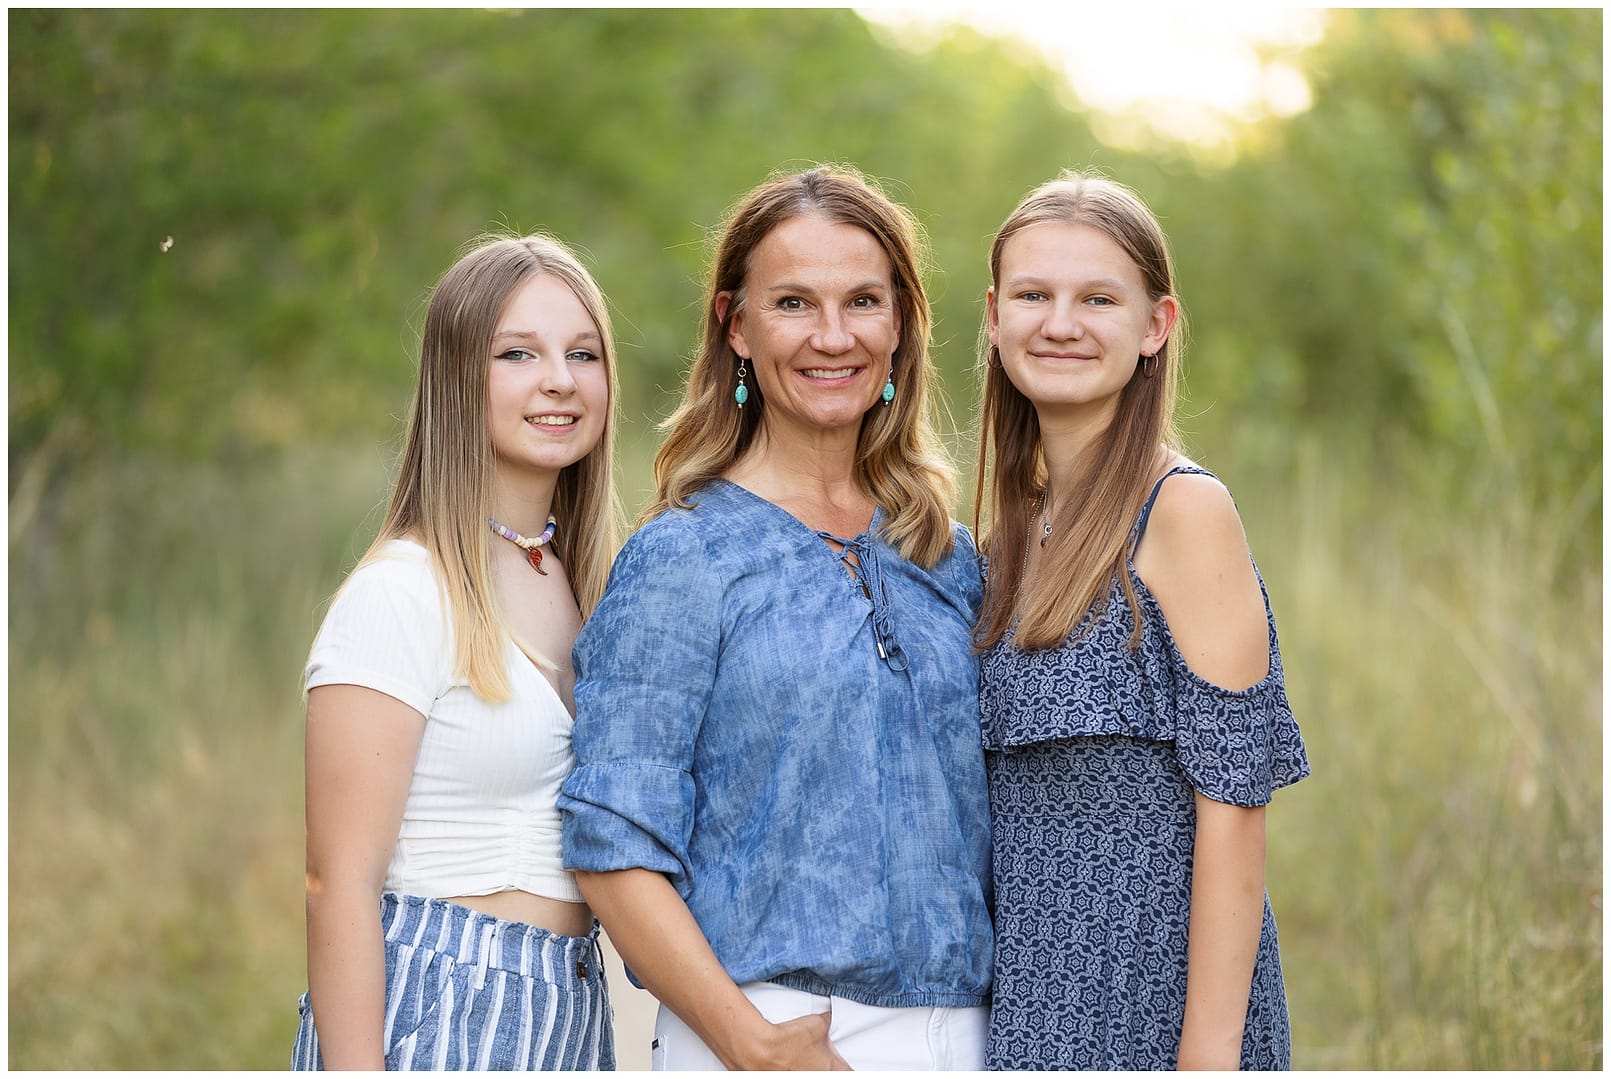 Mom and her two daughters smile for portrait. Photo by Tiffany Hix Photography.